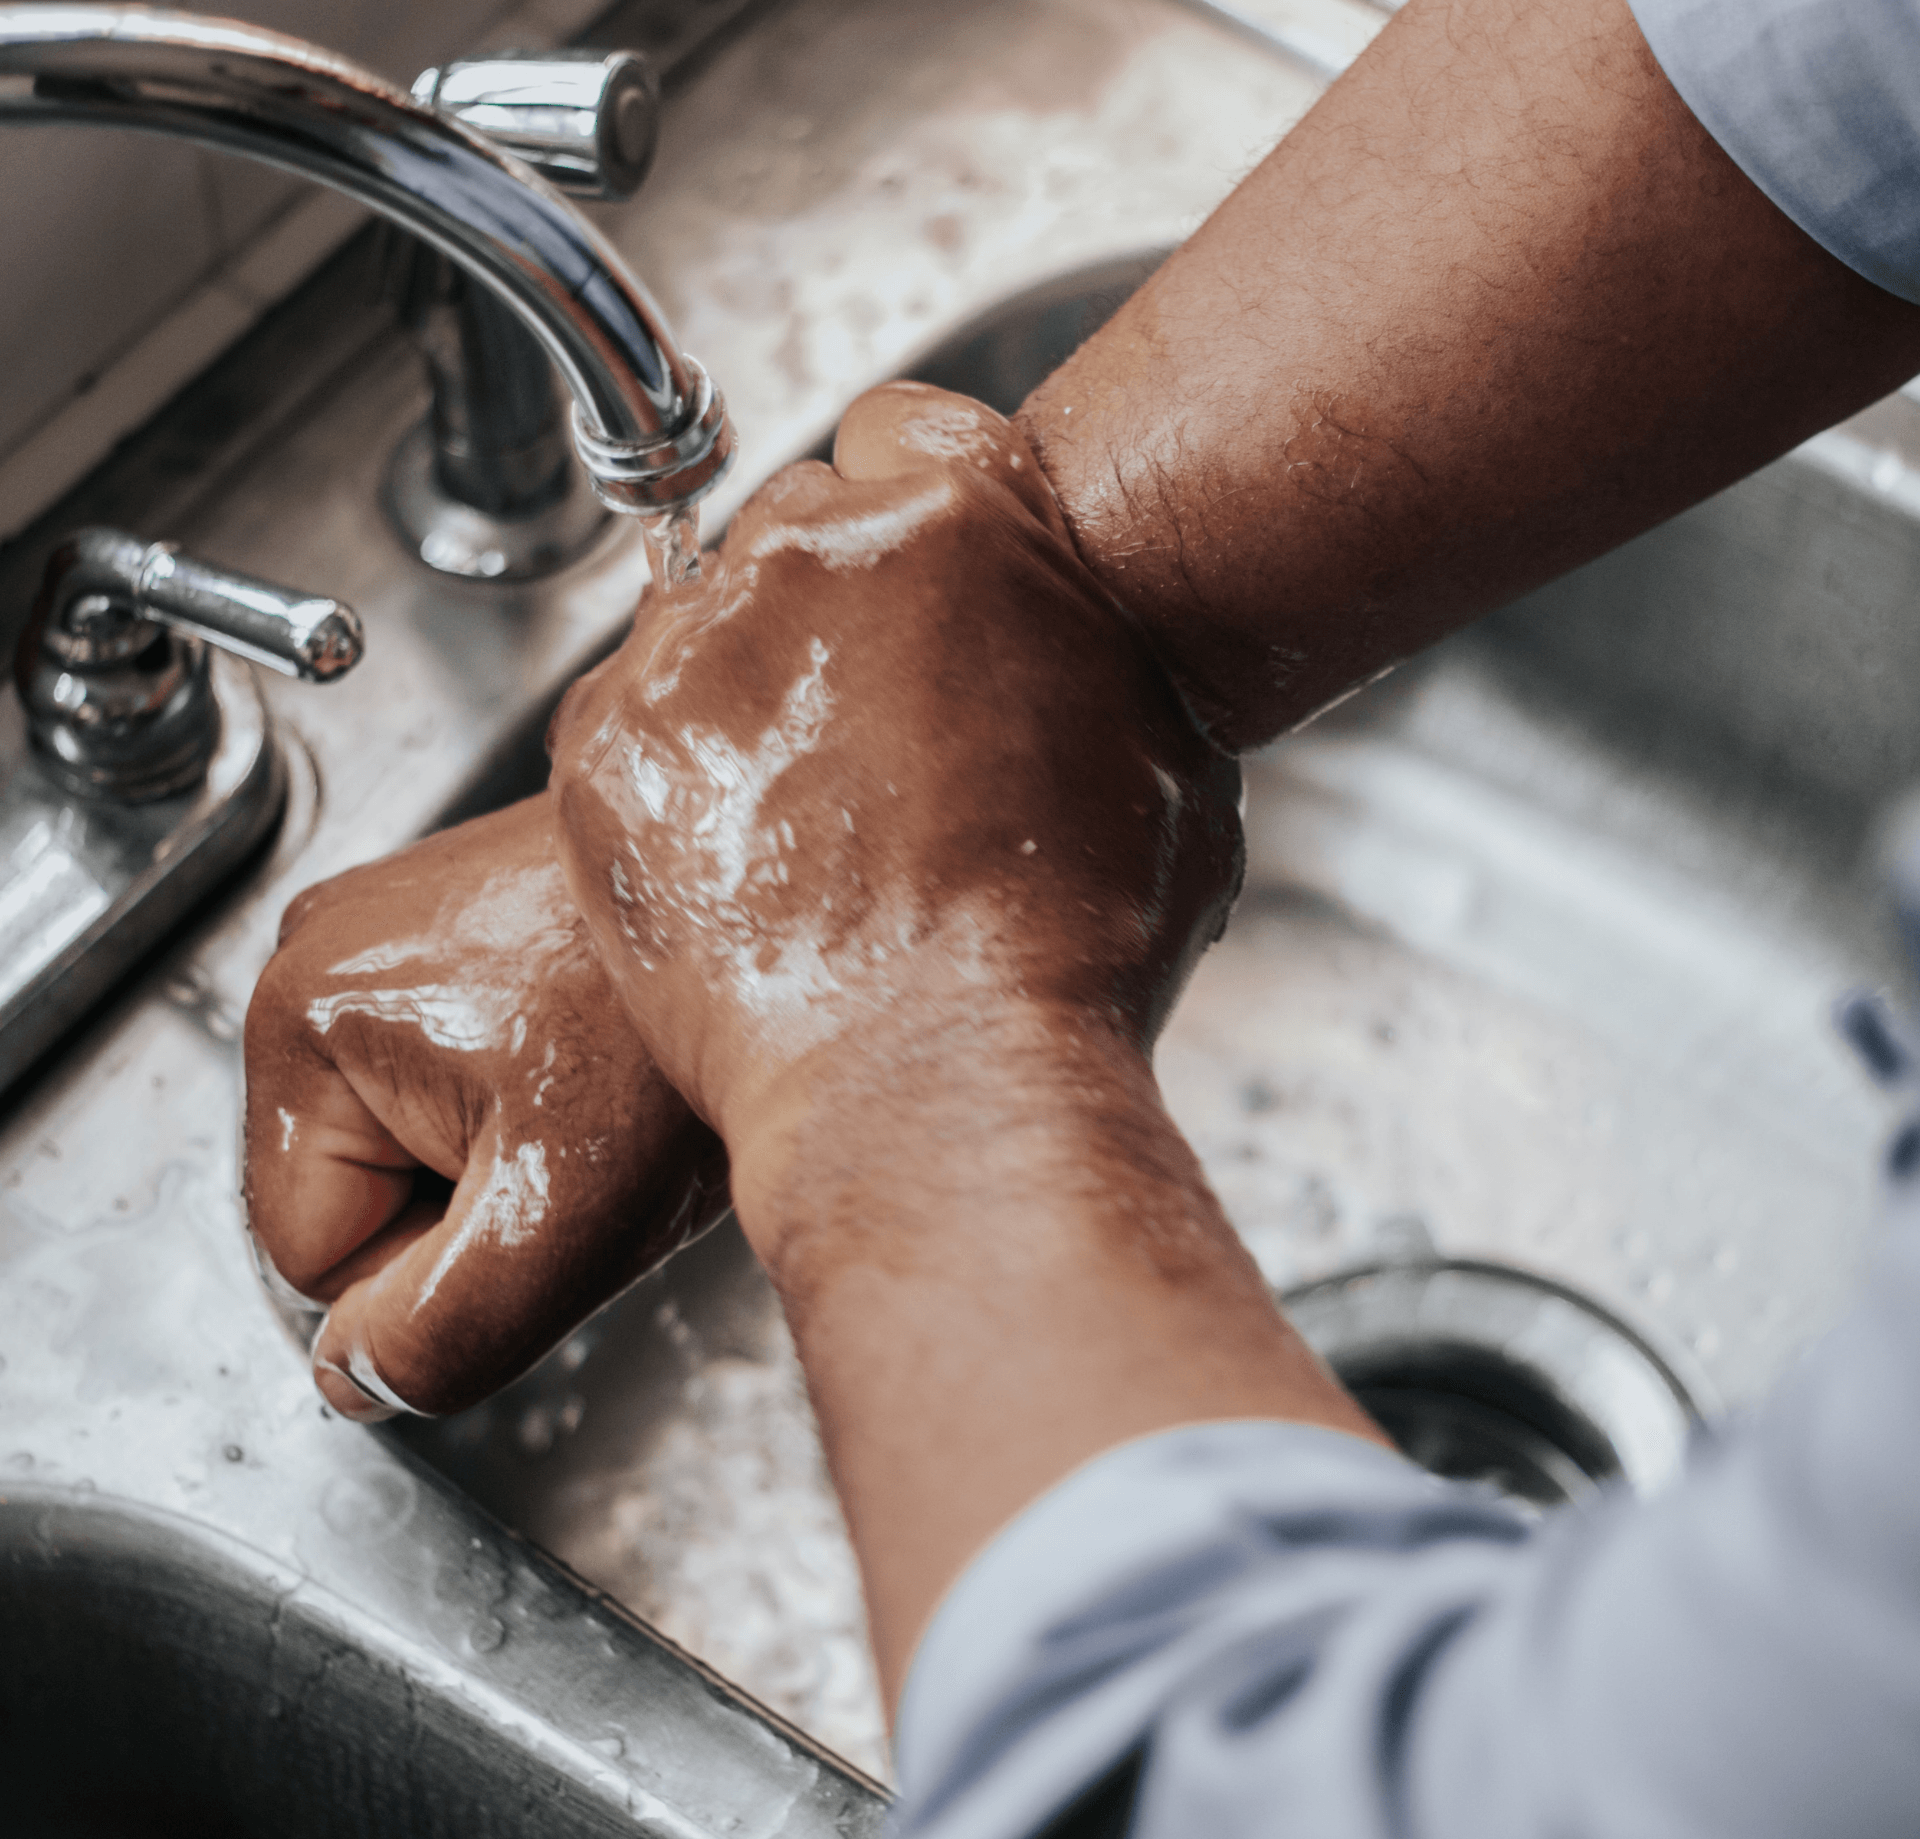 a person is washing their hands in a kitchen sink